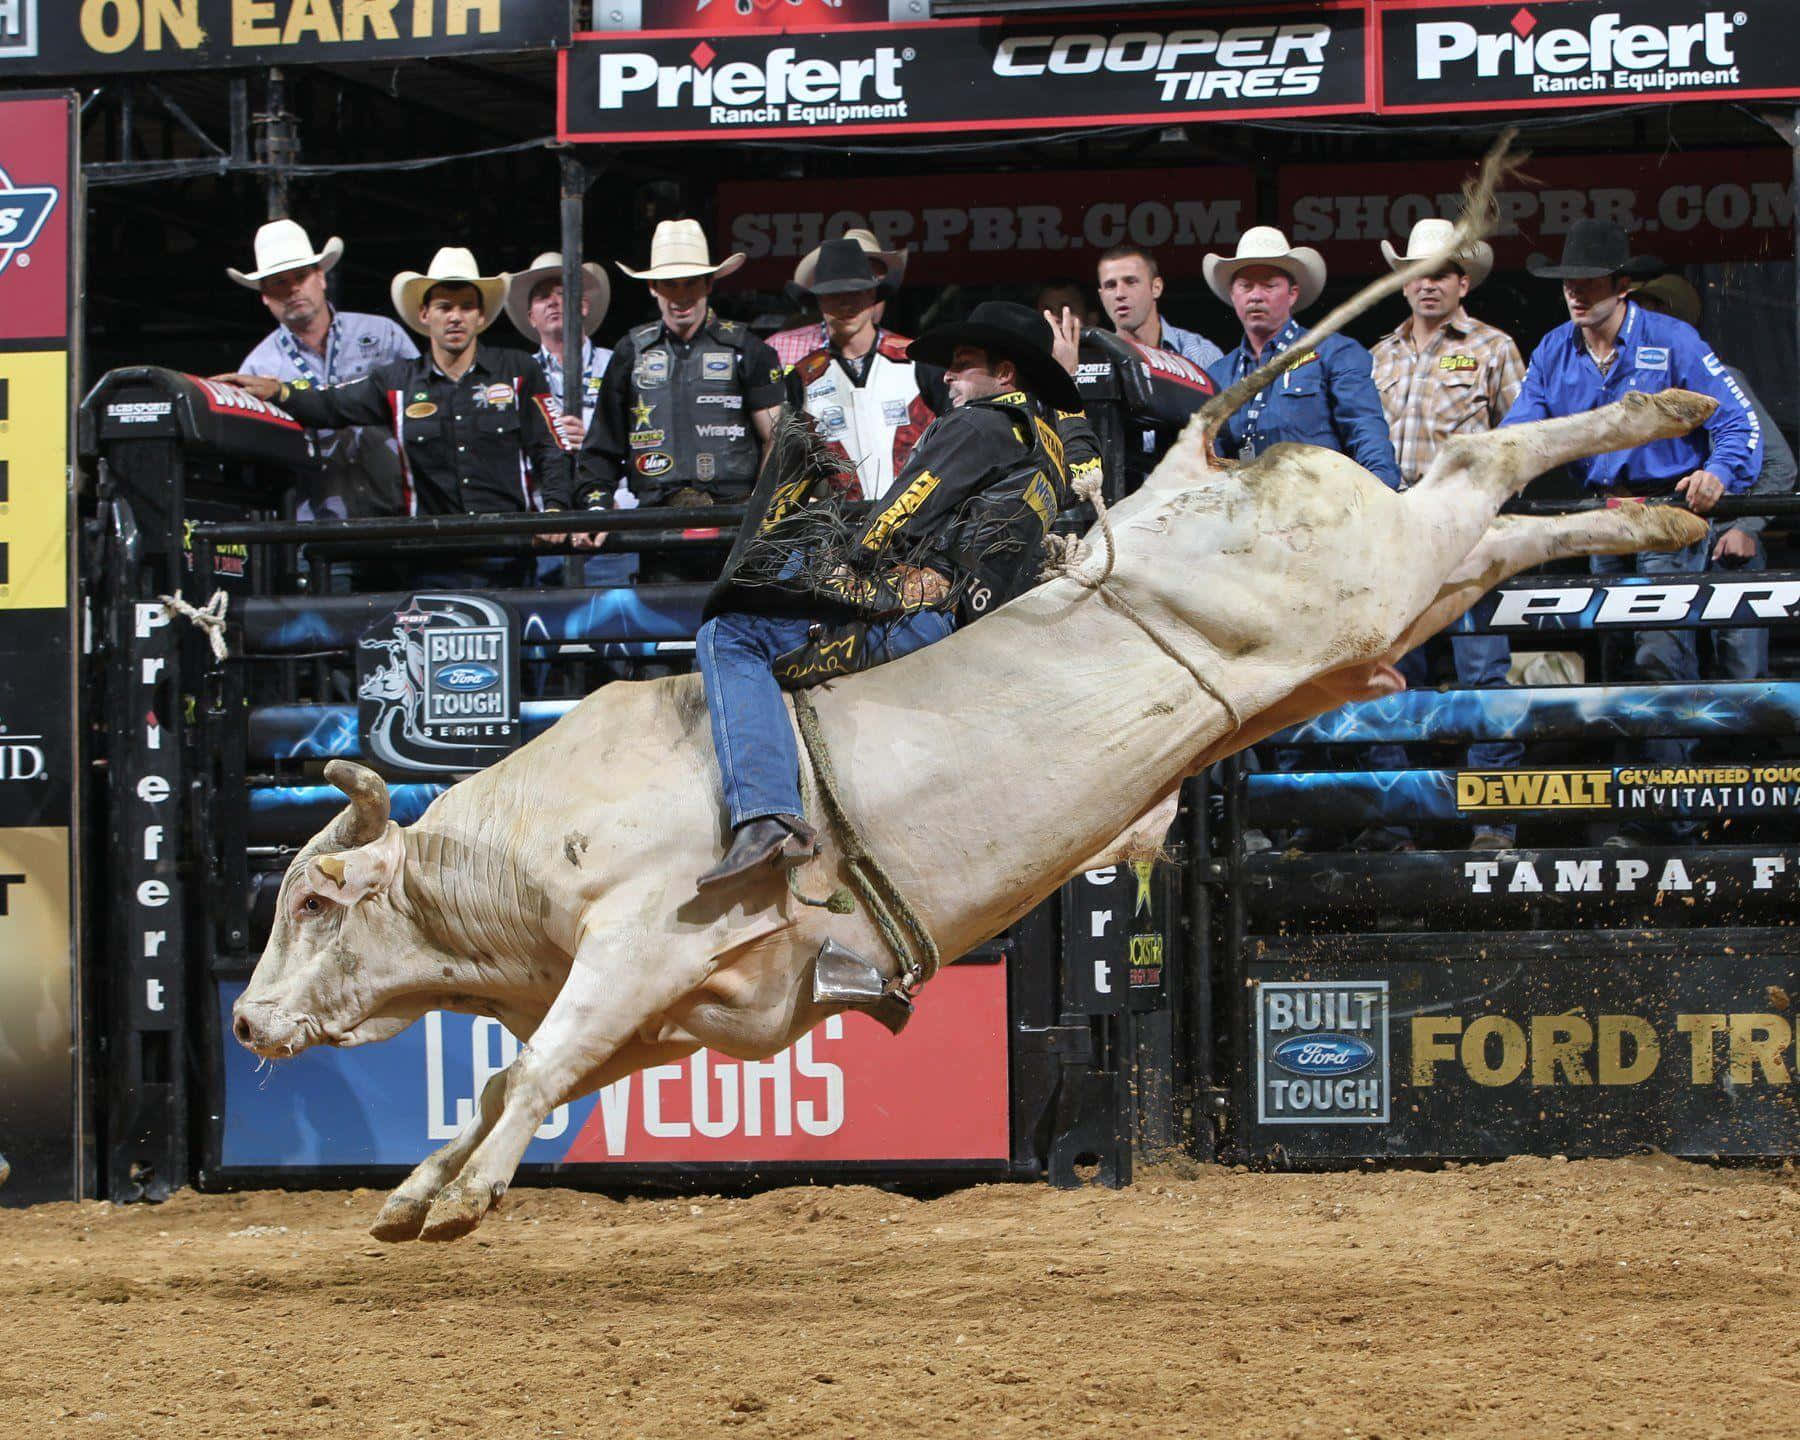 Professional bull rider, pushing their physical and mental boundaries for the crowd's pleasure